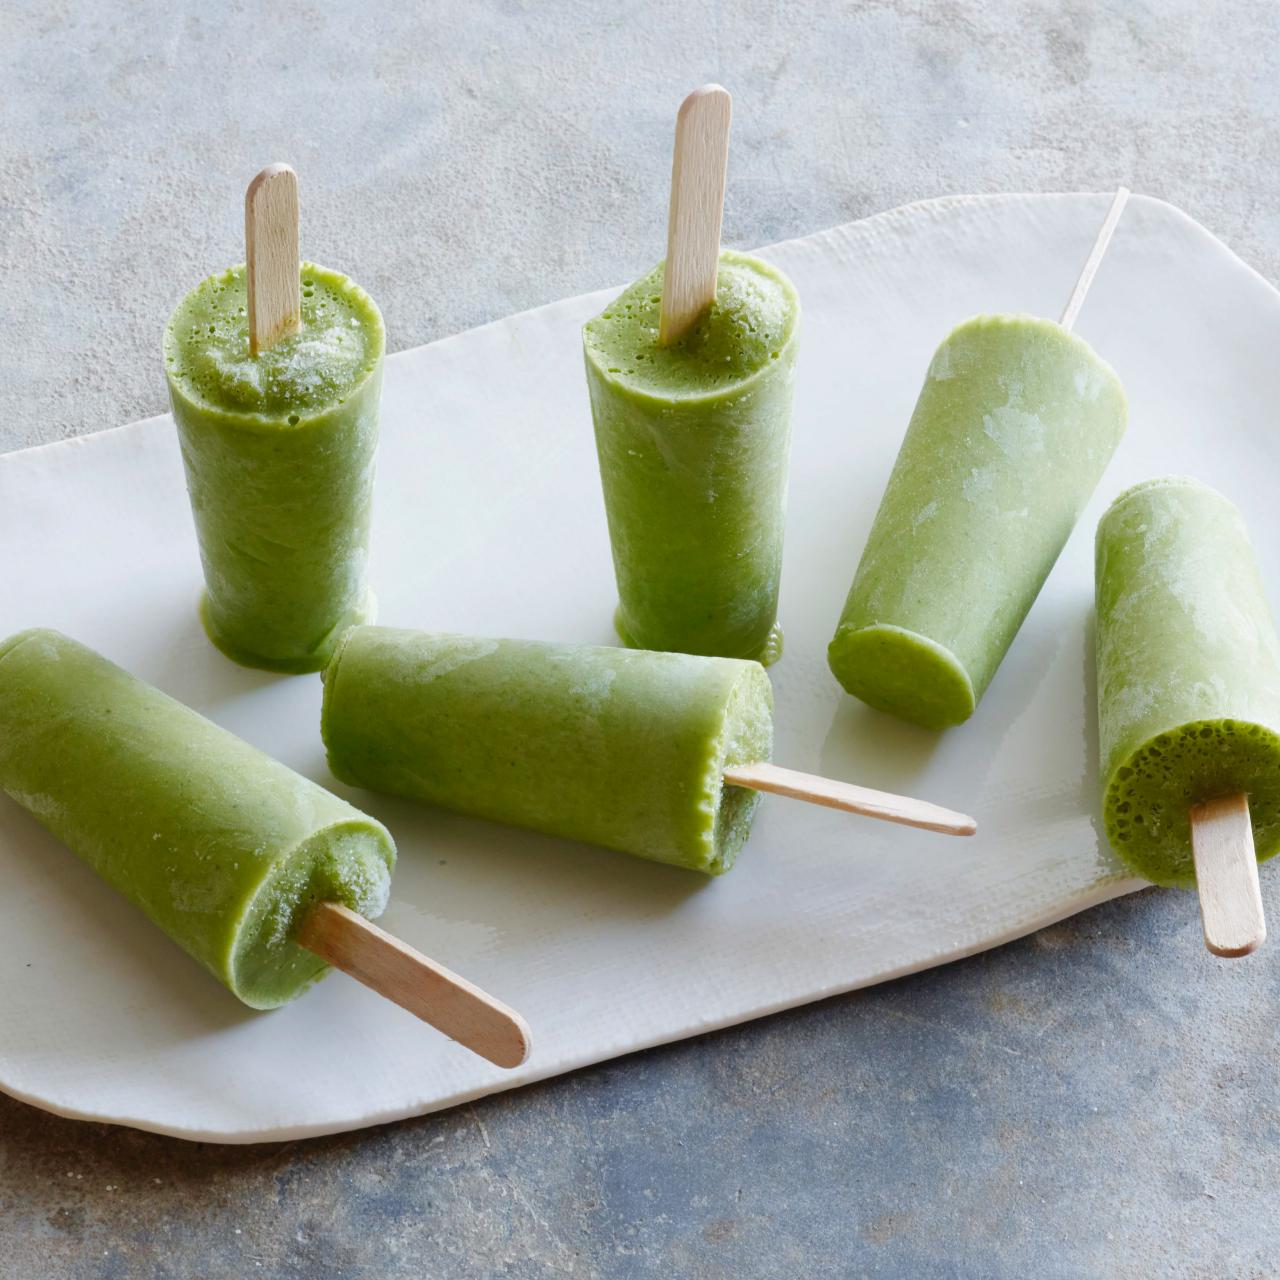 Kale and Pineapple Popsicles with Zoku Quick Pop Maker - White Blank Space